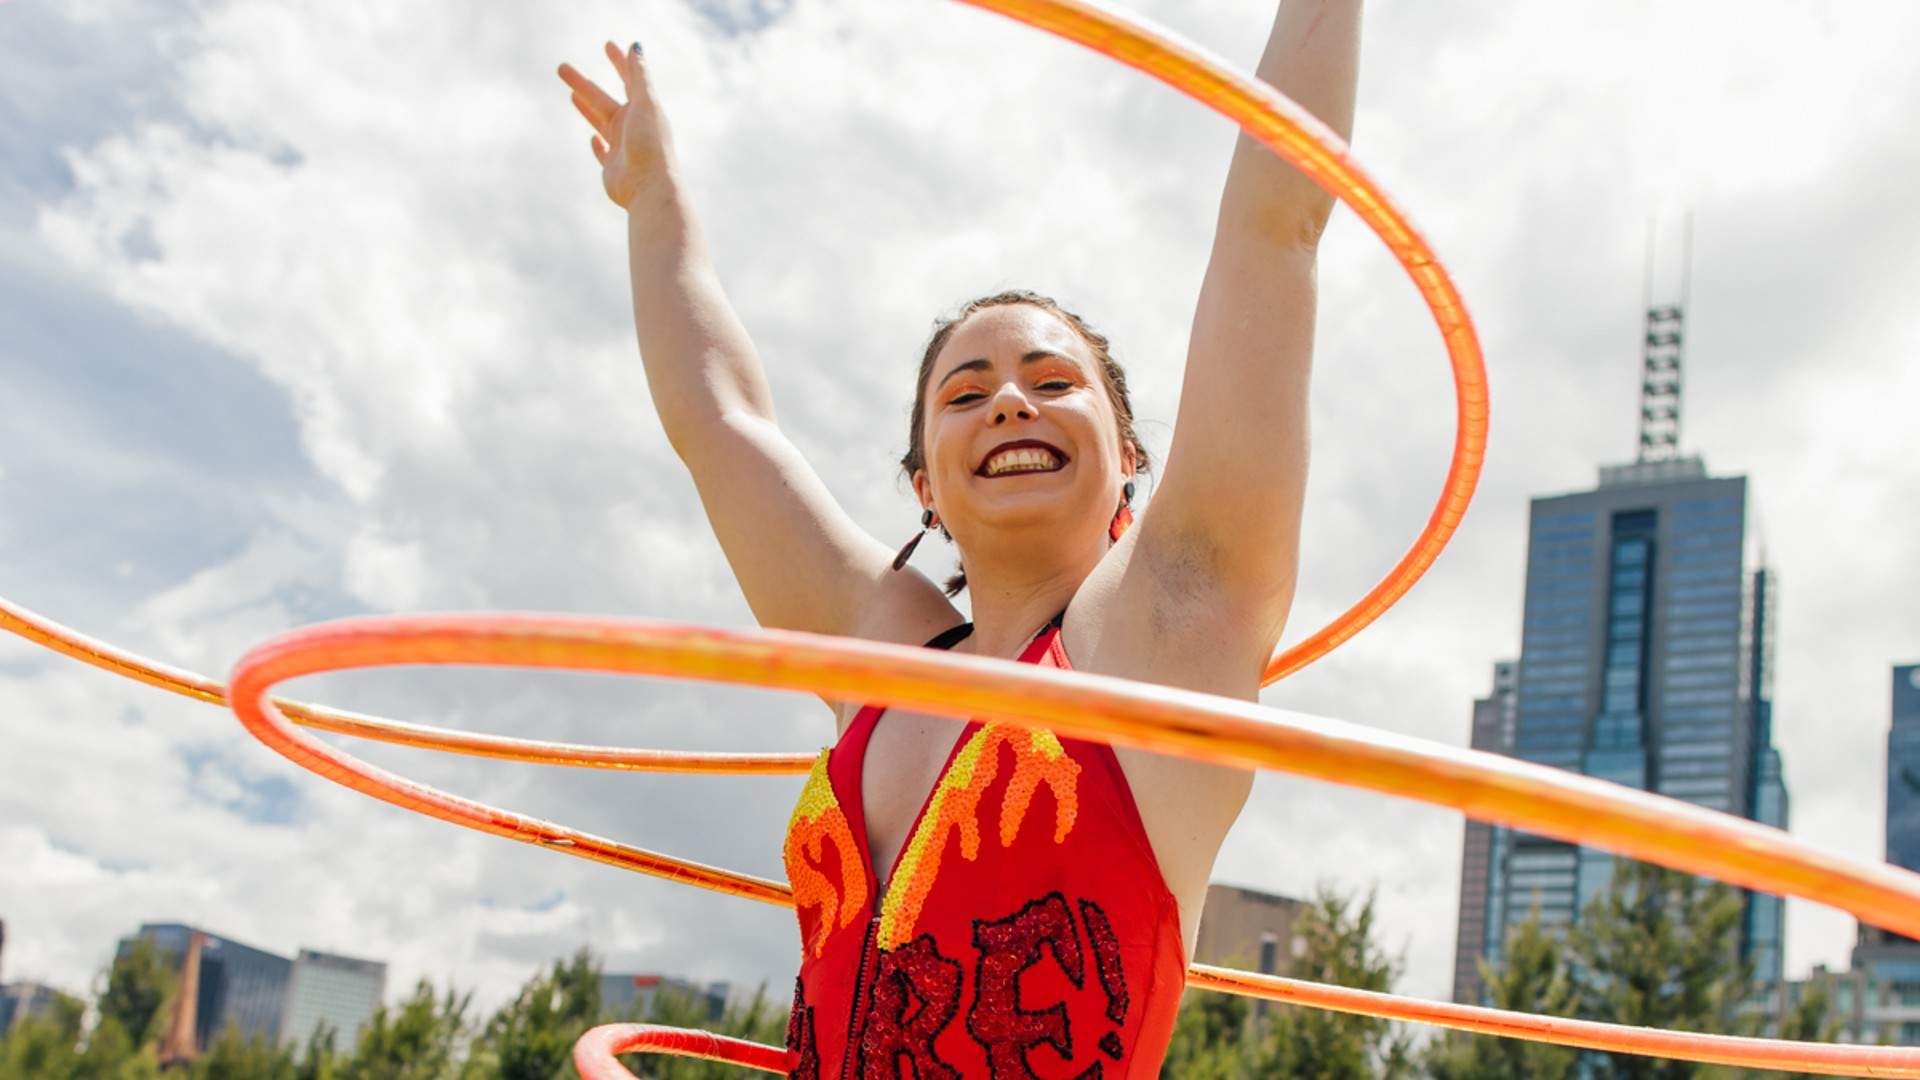 A Roaming Circus Performance Will Fill CBD Laneways, Shops and Balconies This Summer